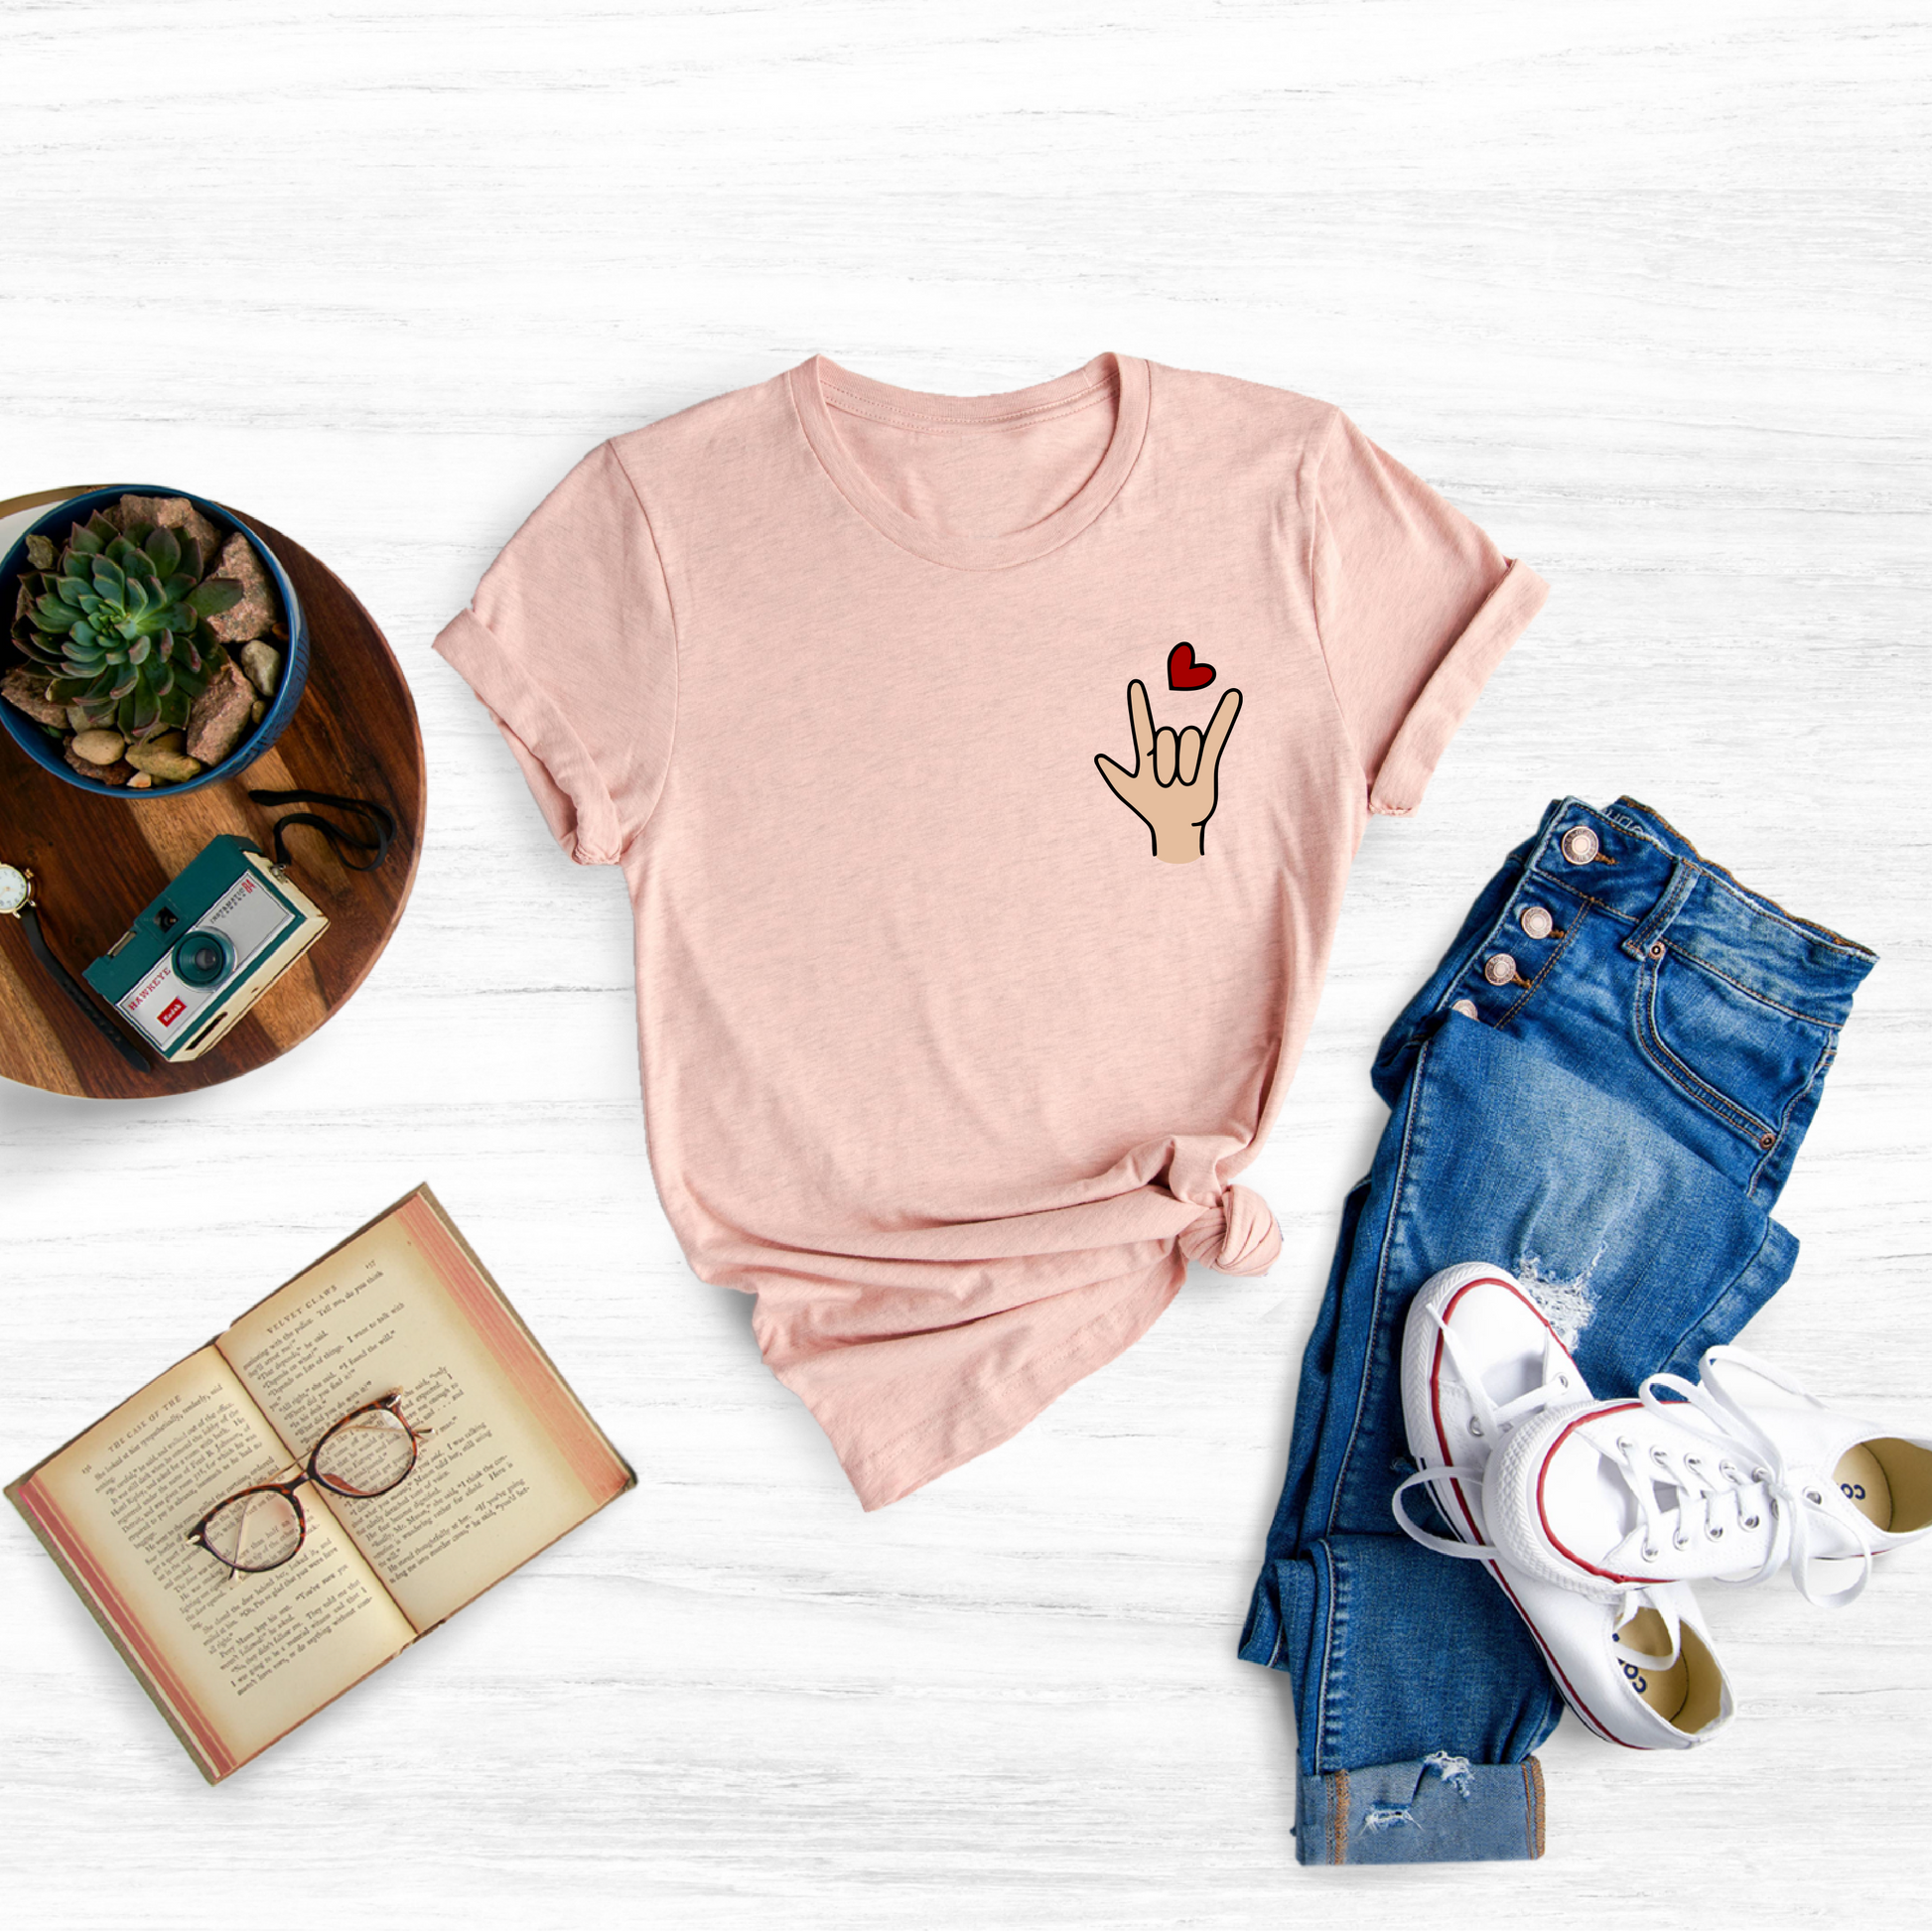 Spread love and joy this Valentine's Day with this adorable Kids Valentine Day Shirt.